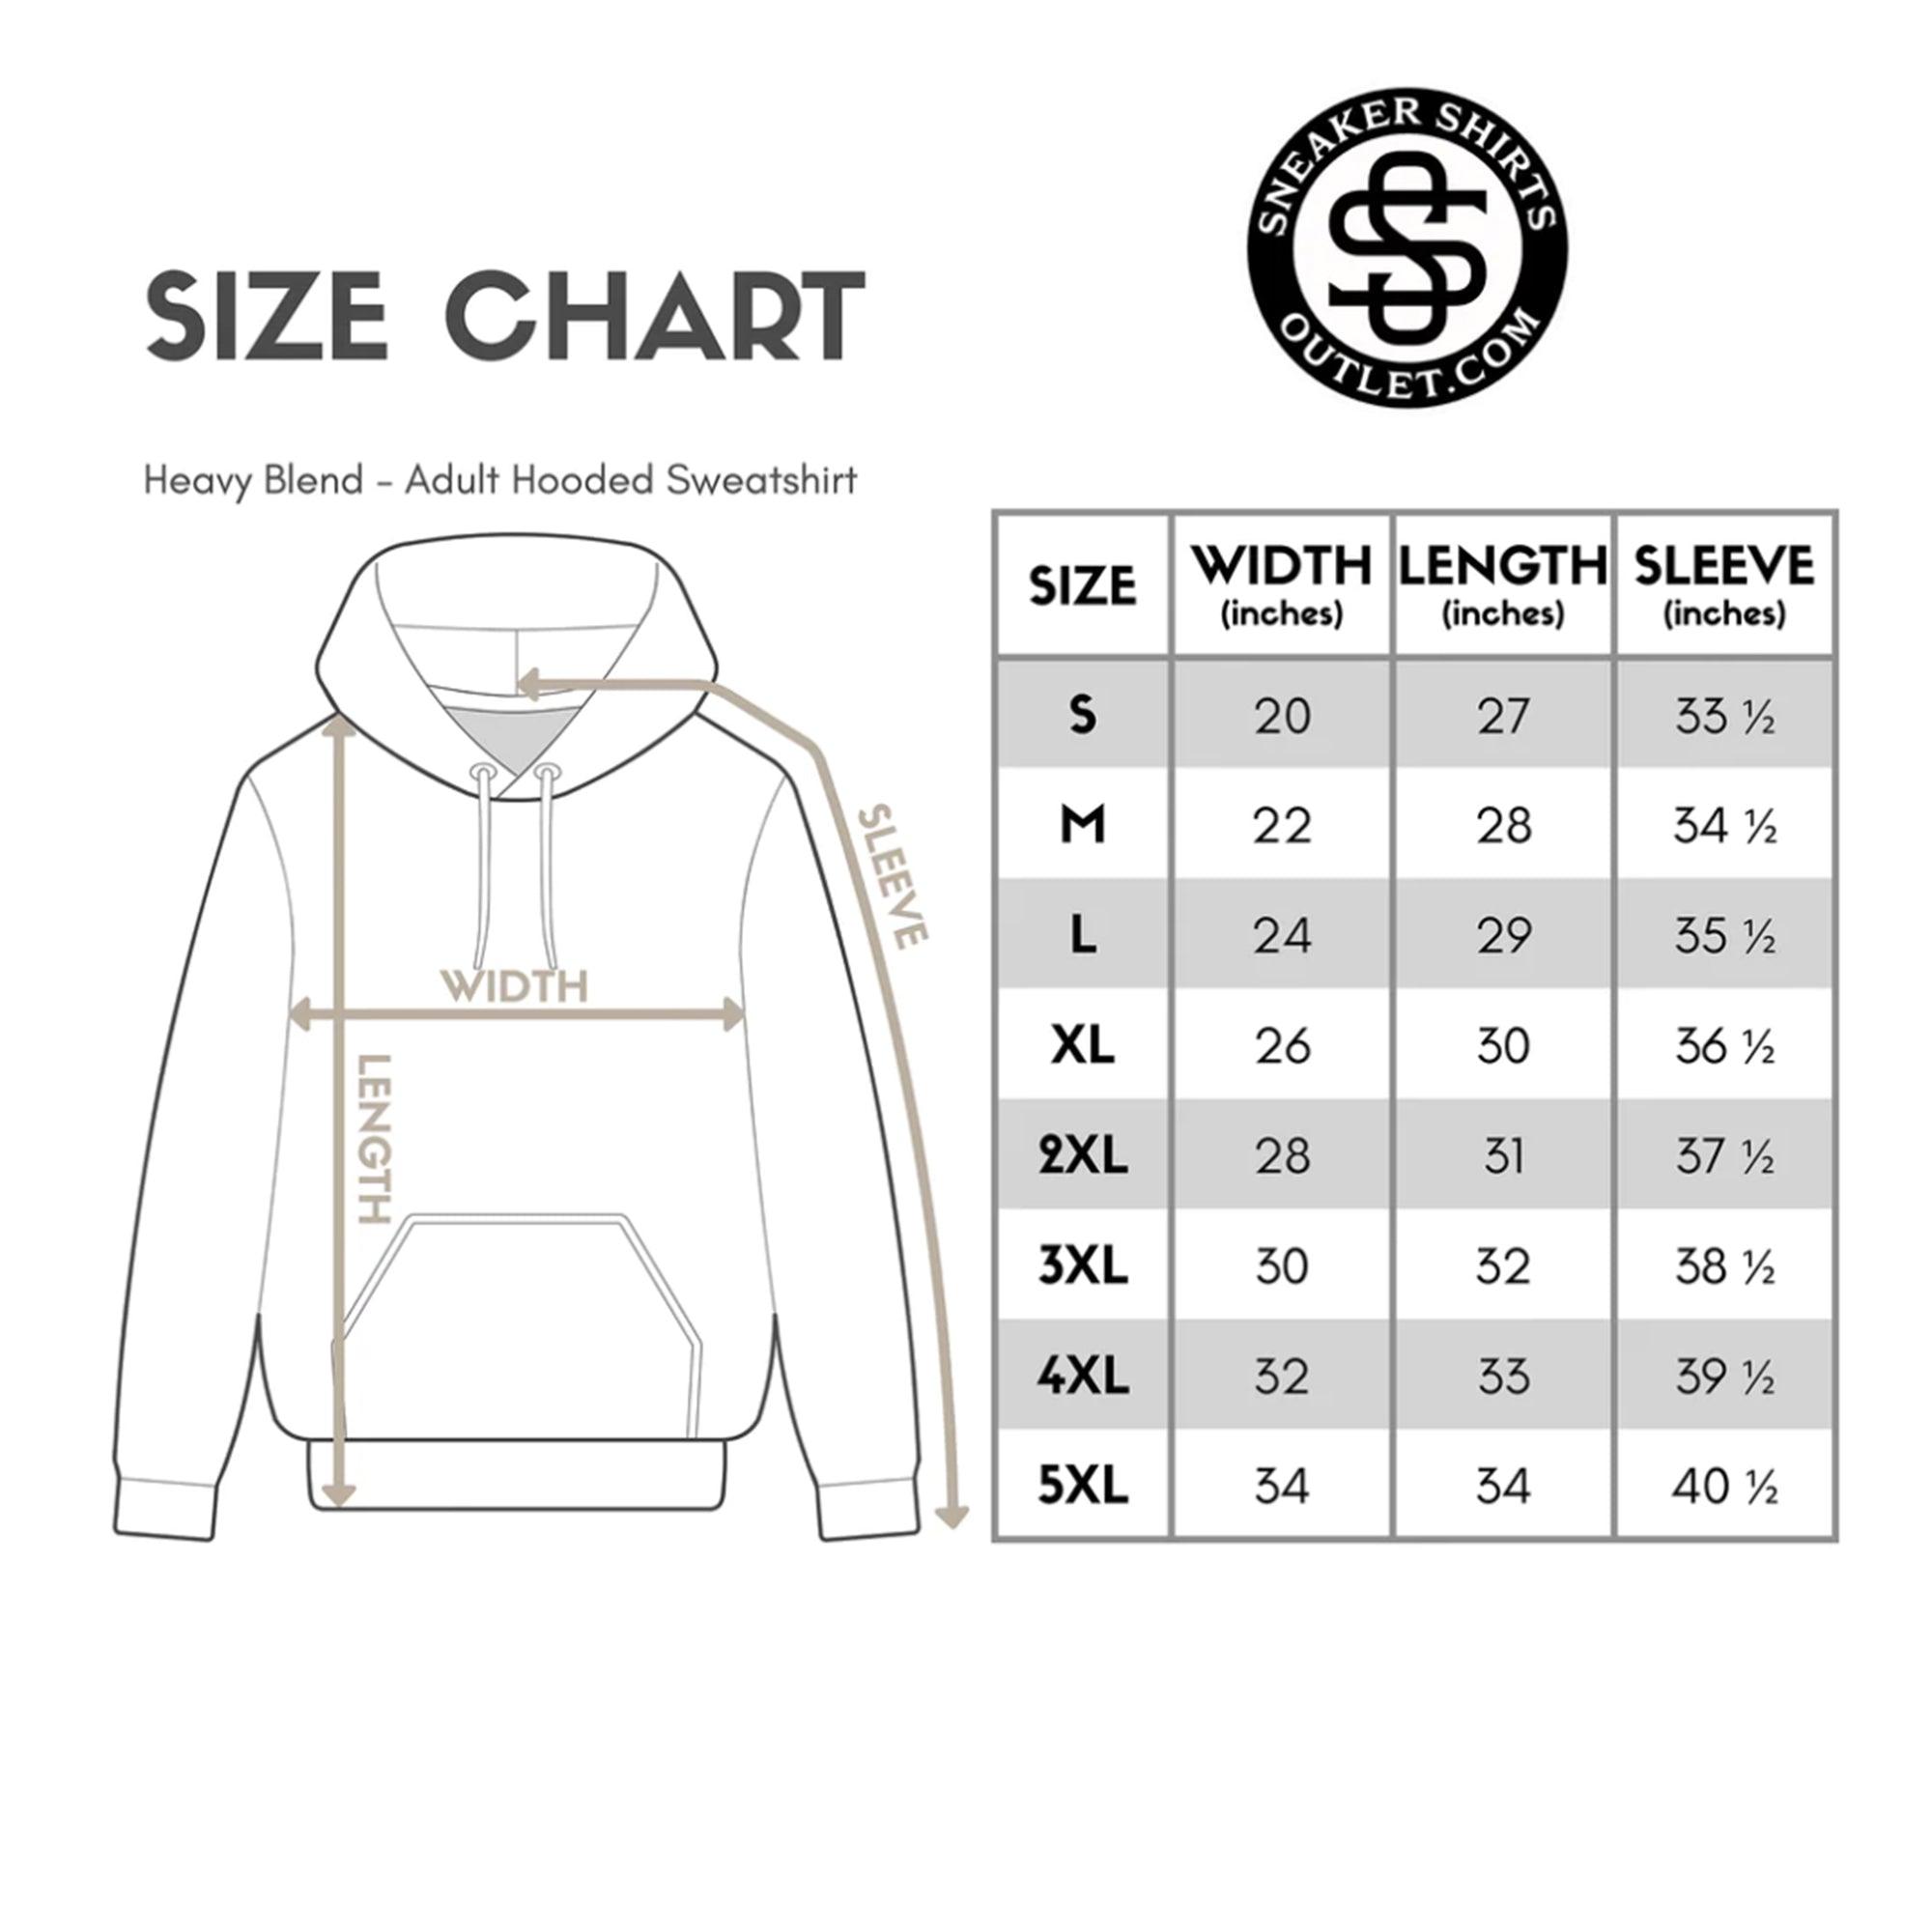 size chart for Rare Breed Hoodie Jordan 14s Low Shocking Pink photo